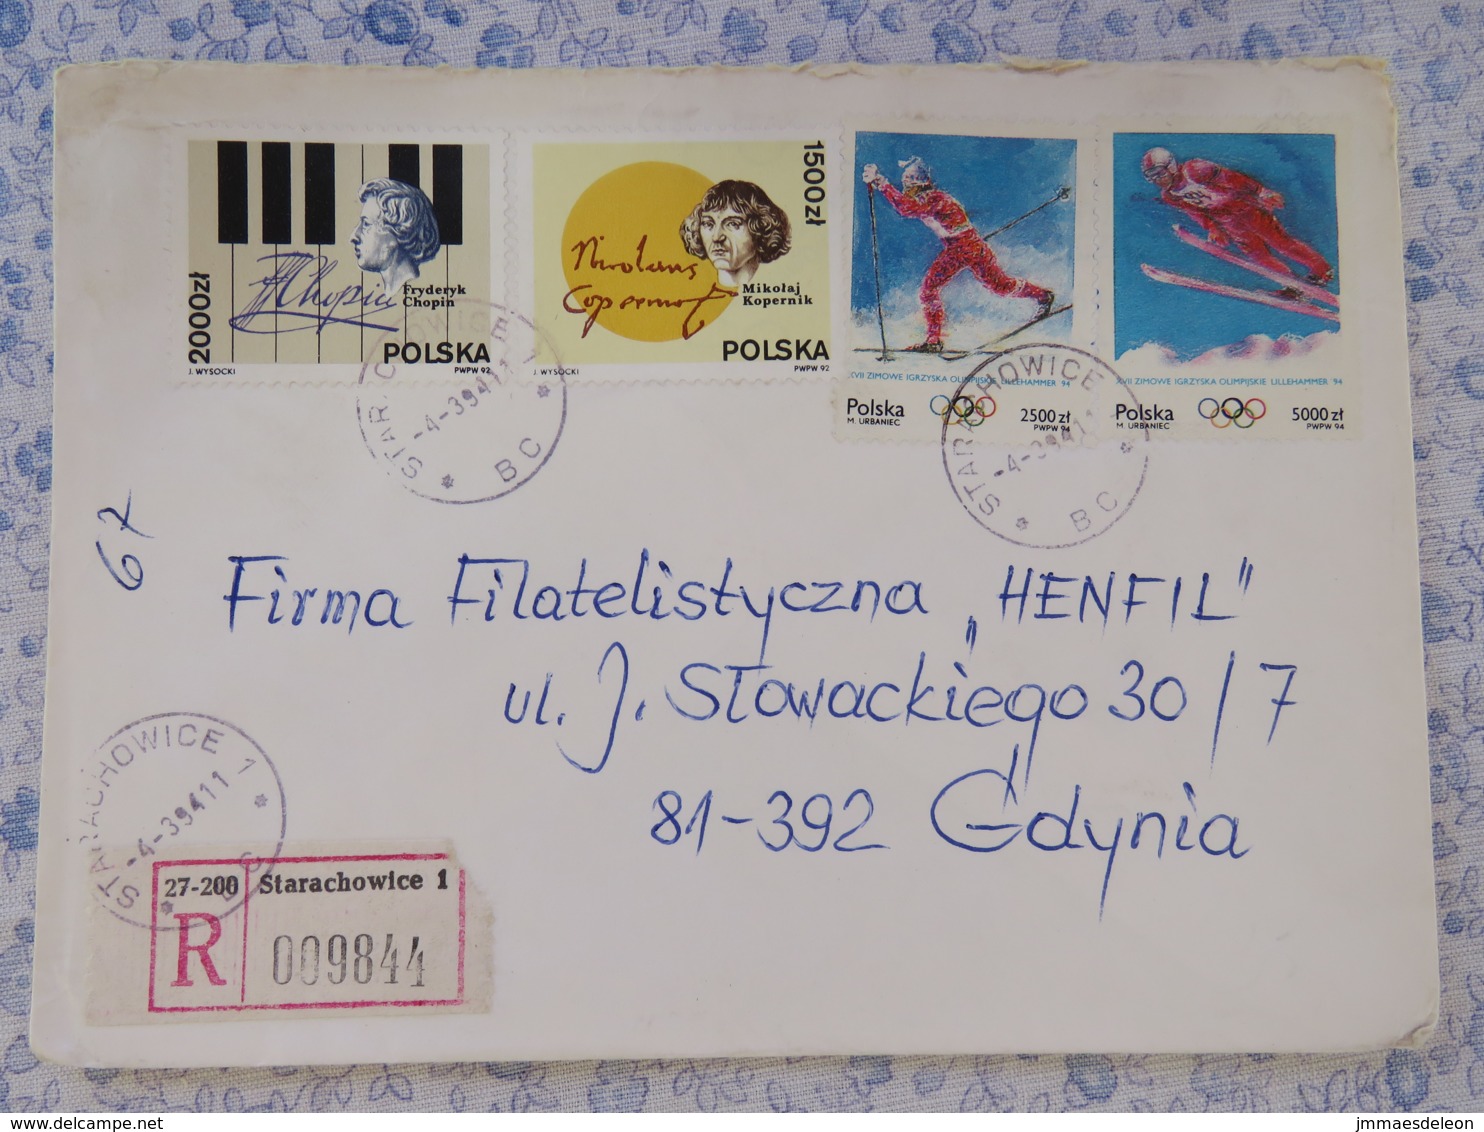 Poland 1994 Registered Cover To Gdynia - Olympic Games - Ski - Copernicus - Chopin Piano Music - Lettres & Documents